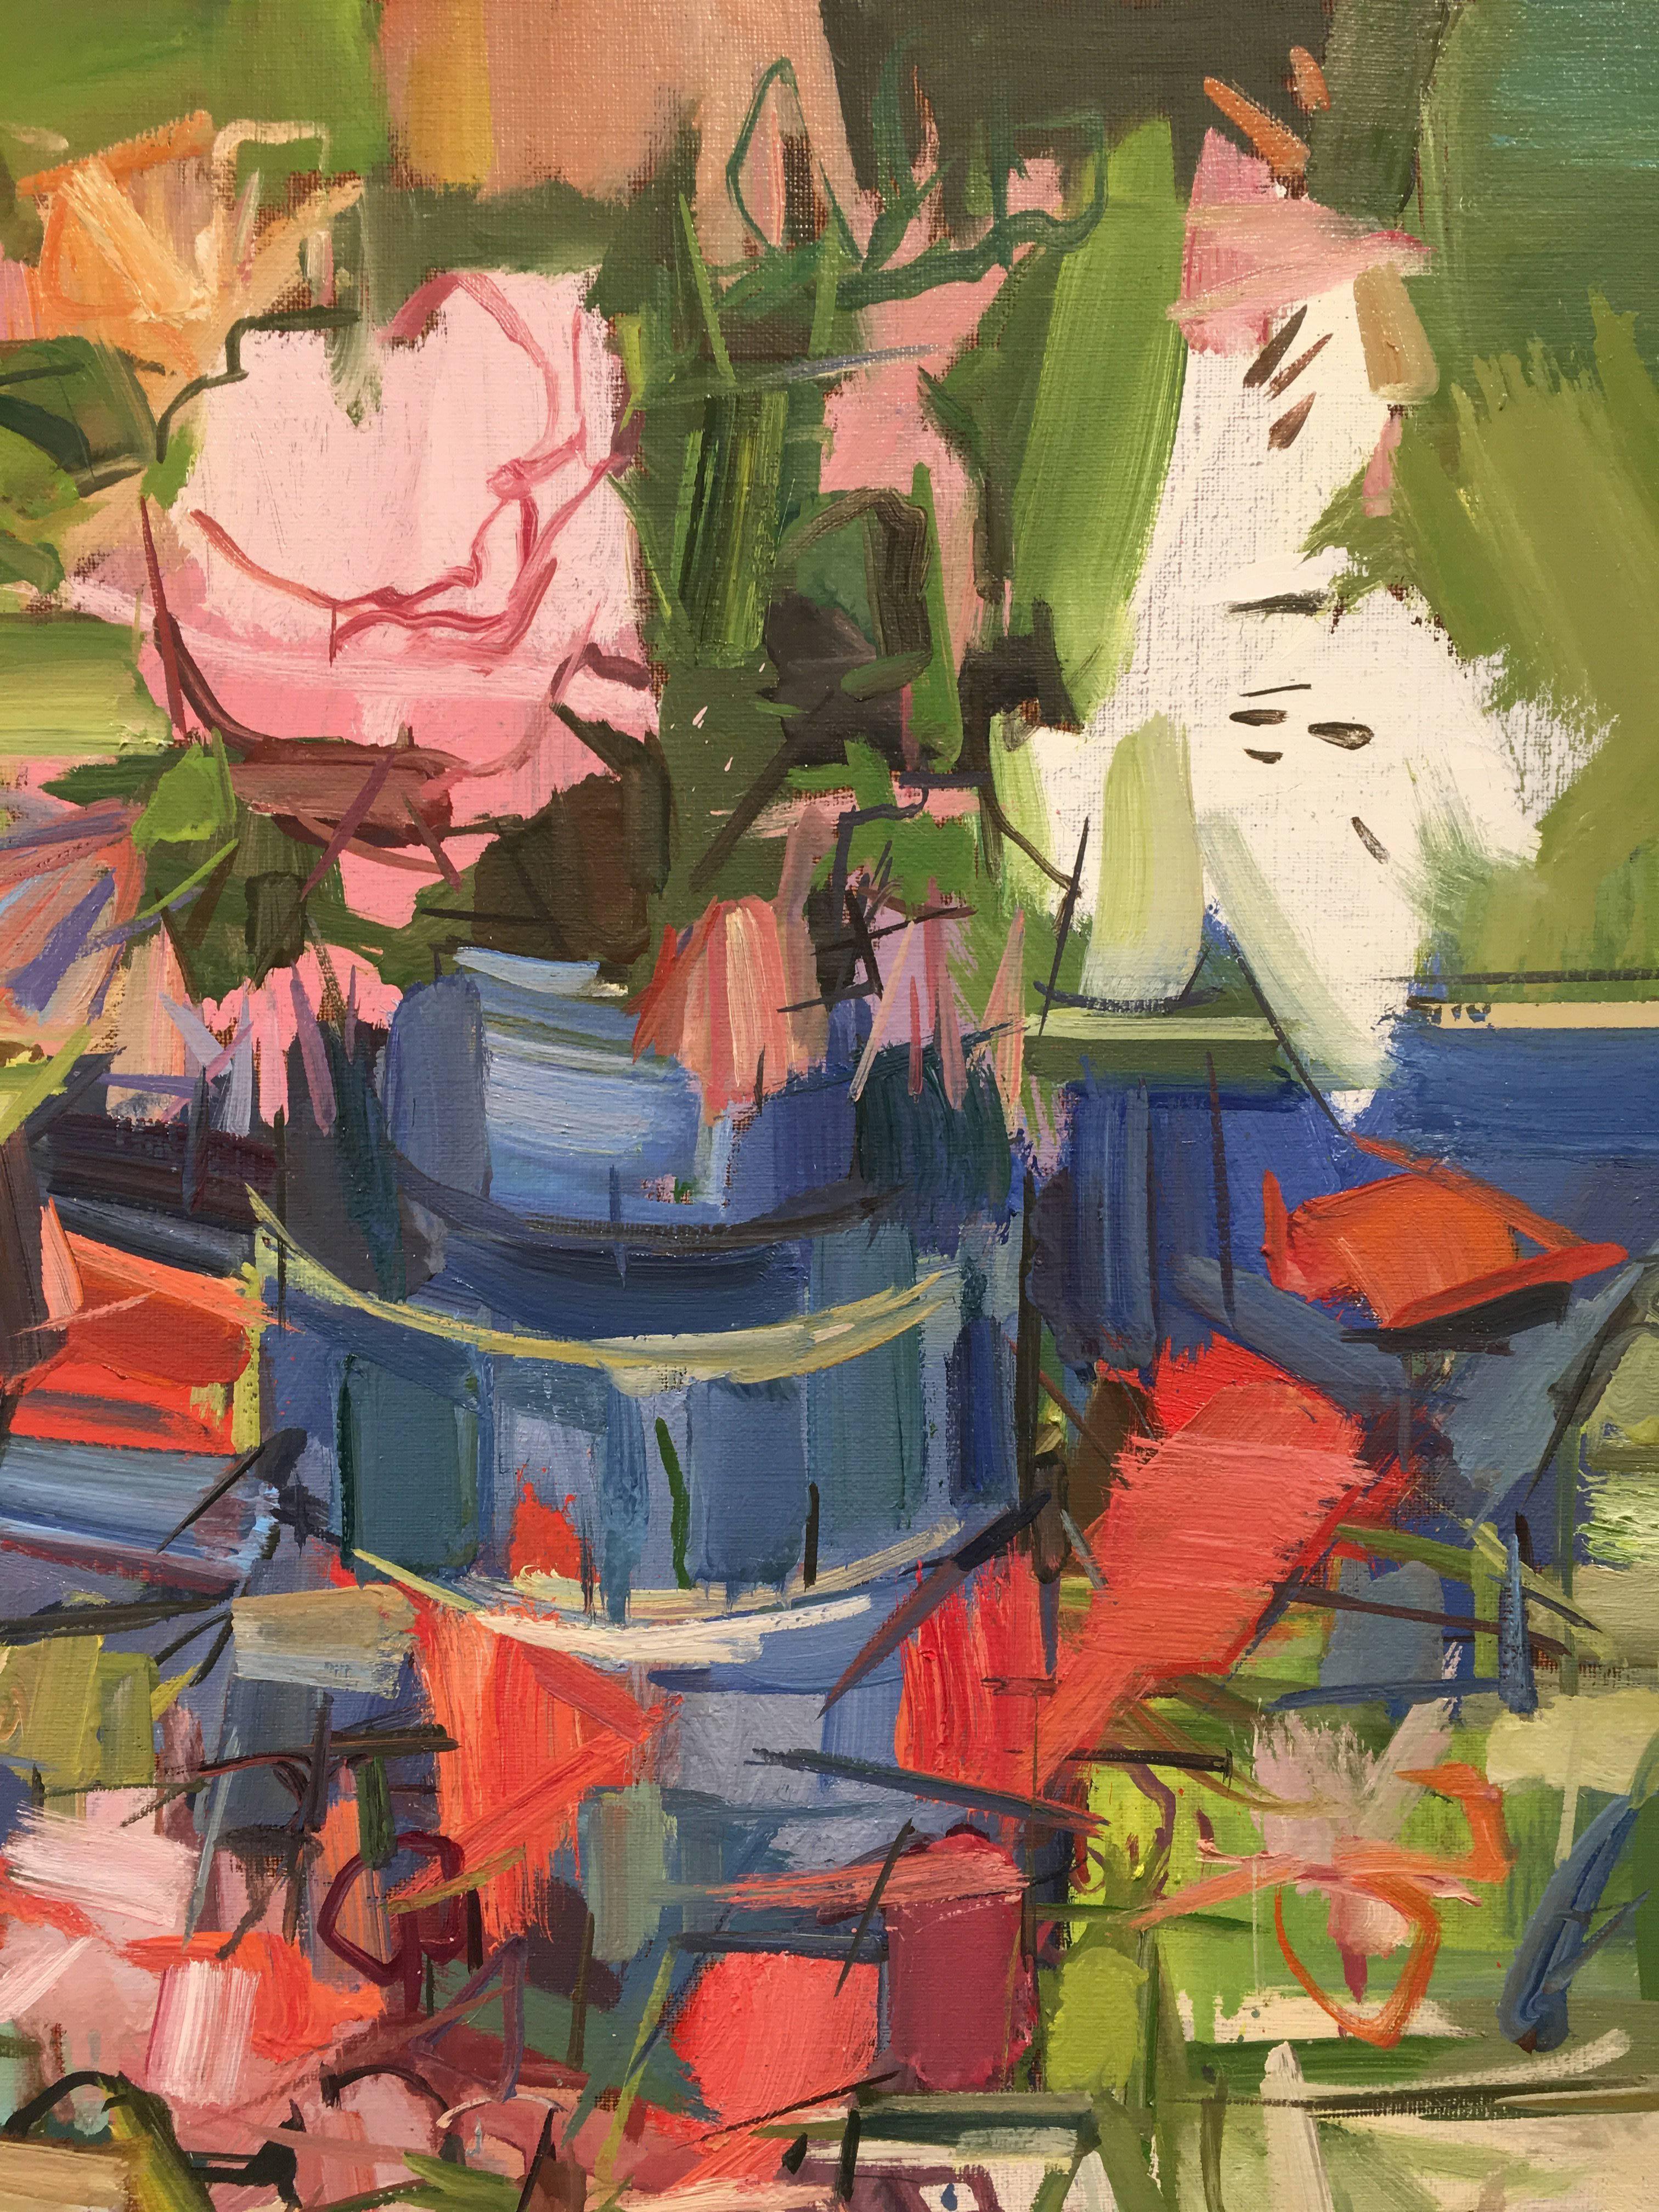 Colorful painting of flowers in a dark blue vase from Francis Sills' 2017 series of Flora Paintings. The flowers, a pink rose and a white lily, contrast the verdant green background. The arrangement is reflected in the surface of the table, doubling